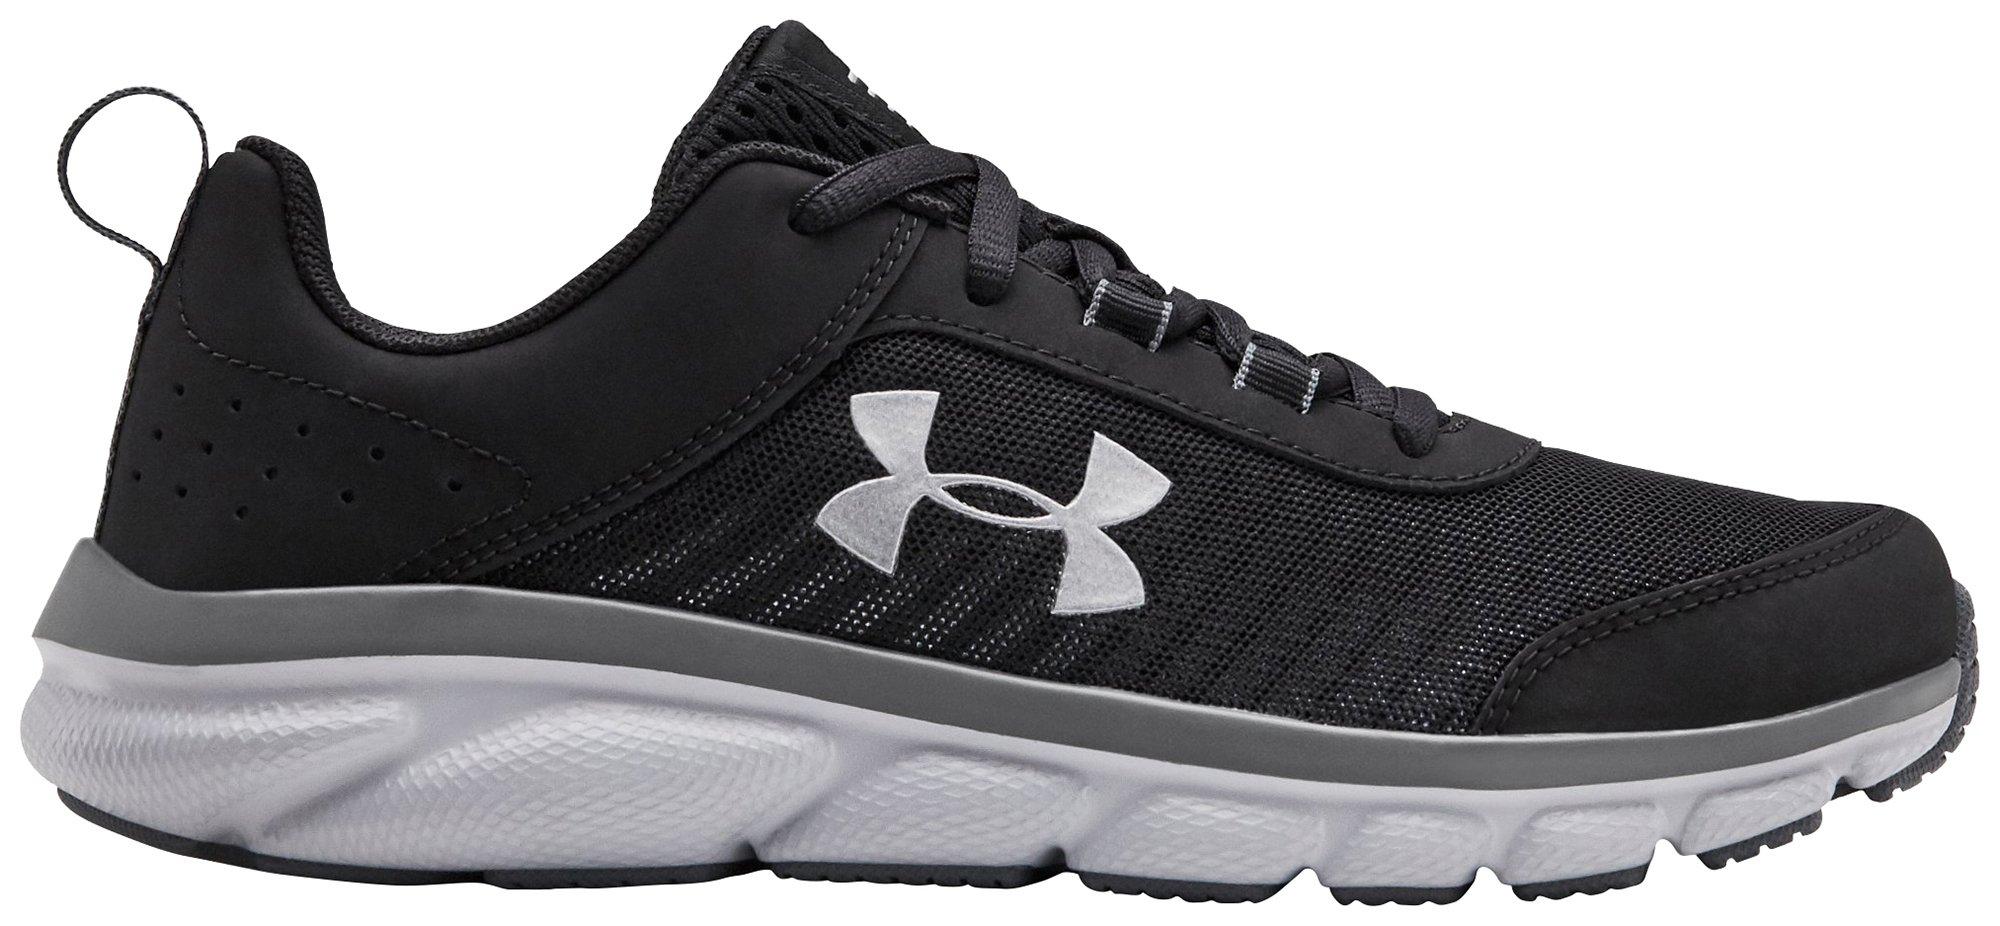 under armour stability shoes